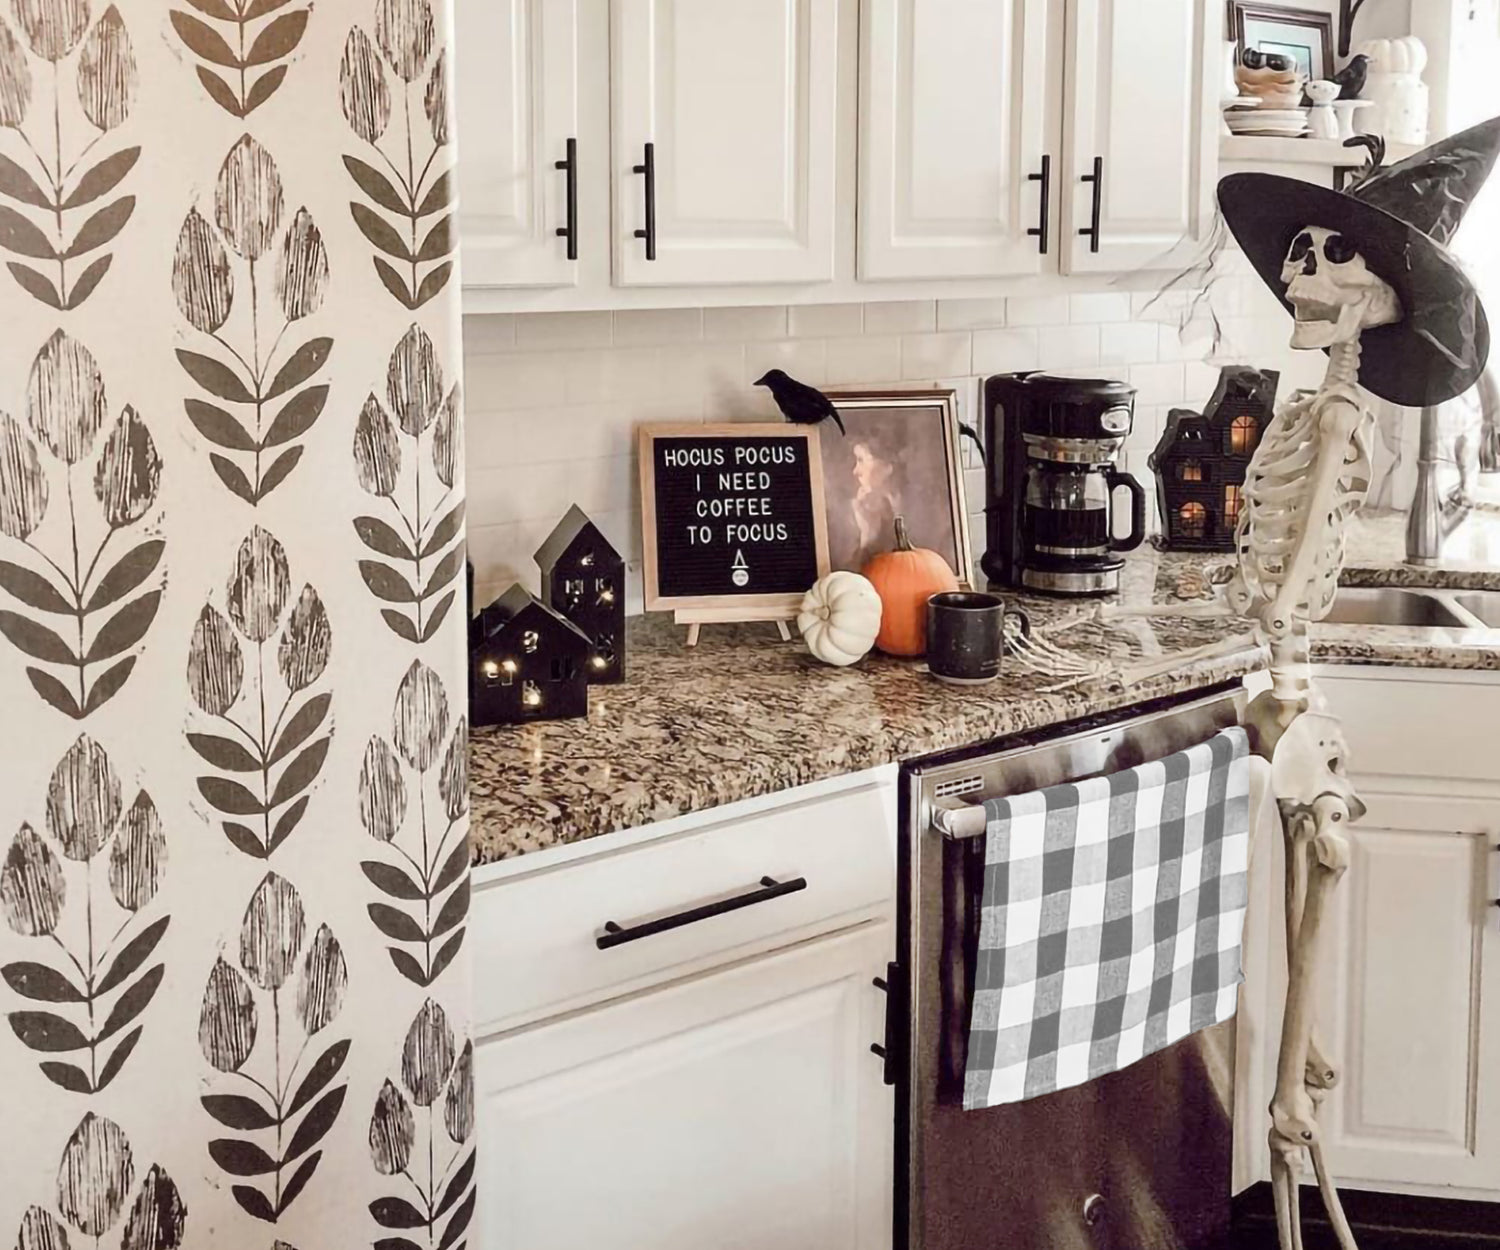 10 Ideas for Decorating the Kitchen with Cute Kitchen Towels